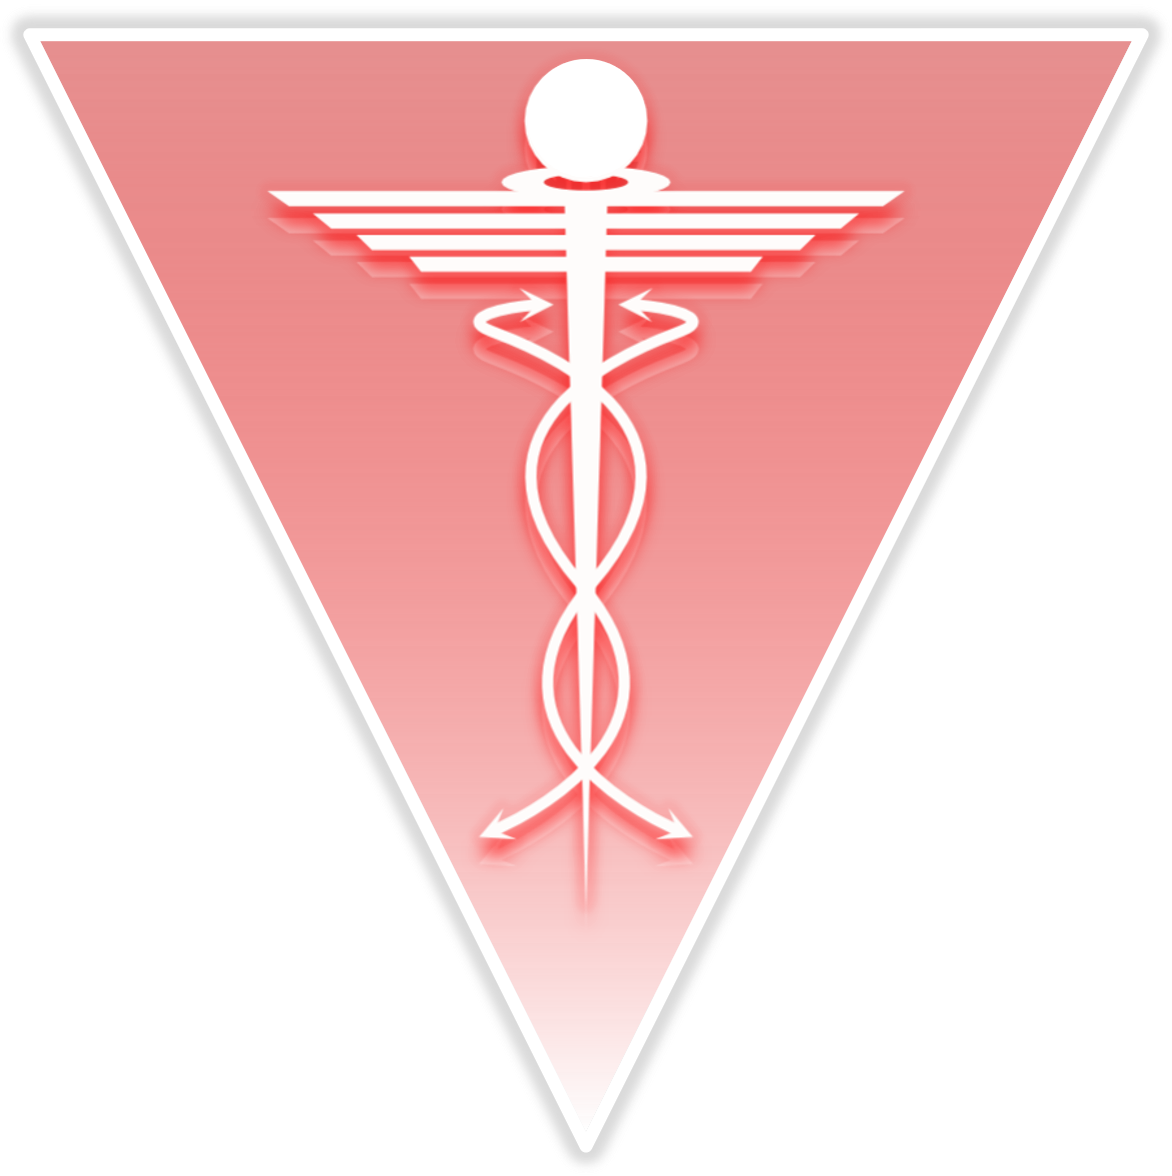 Triangular shape with swirling patterned symbol indicating search and rescue organization.